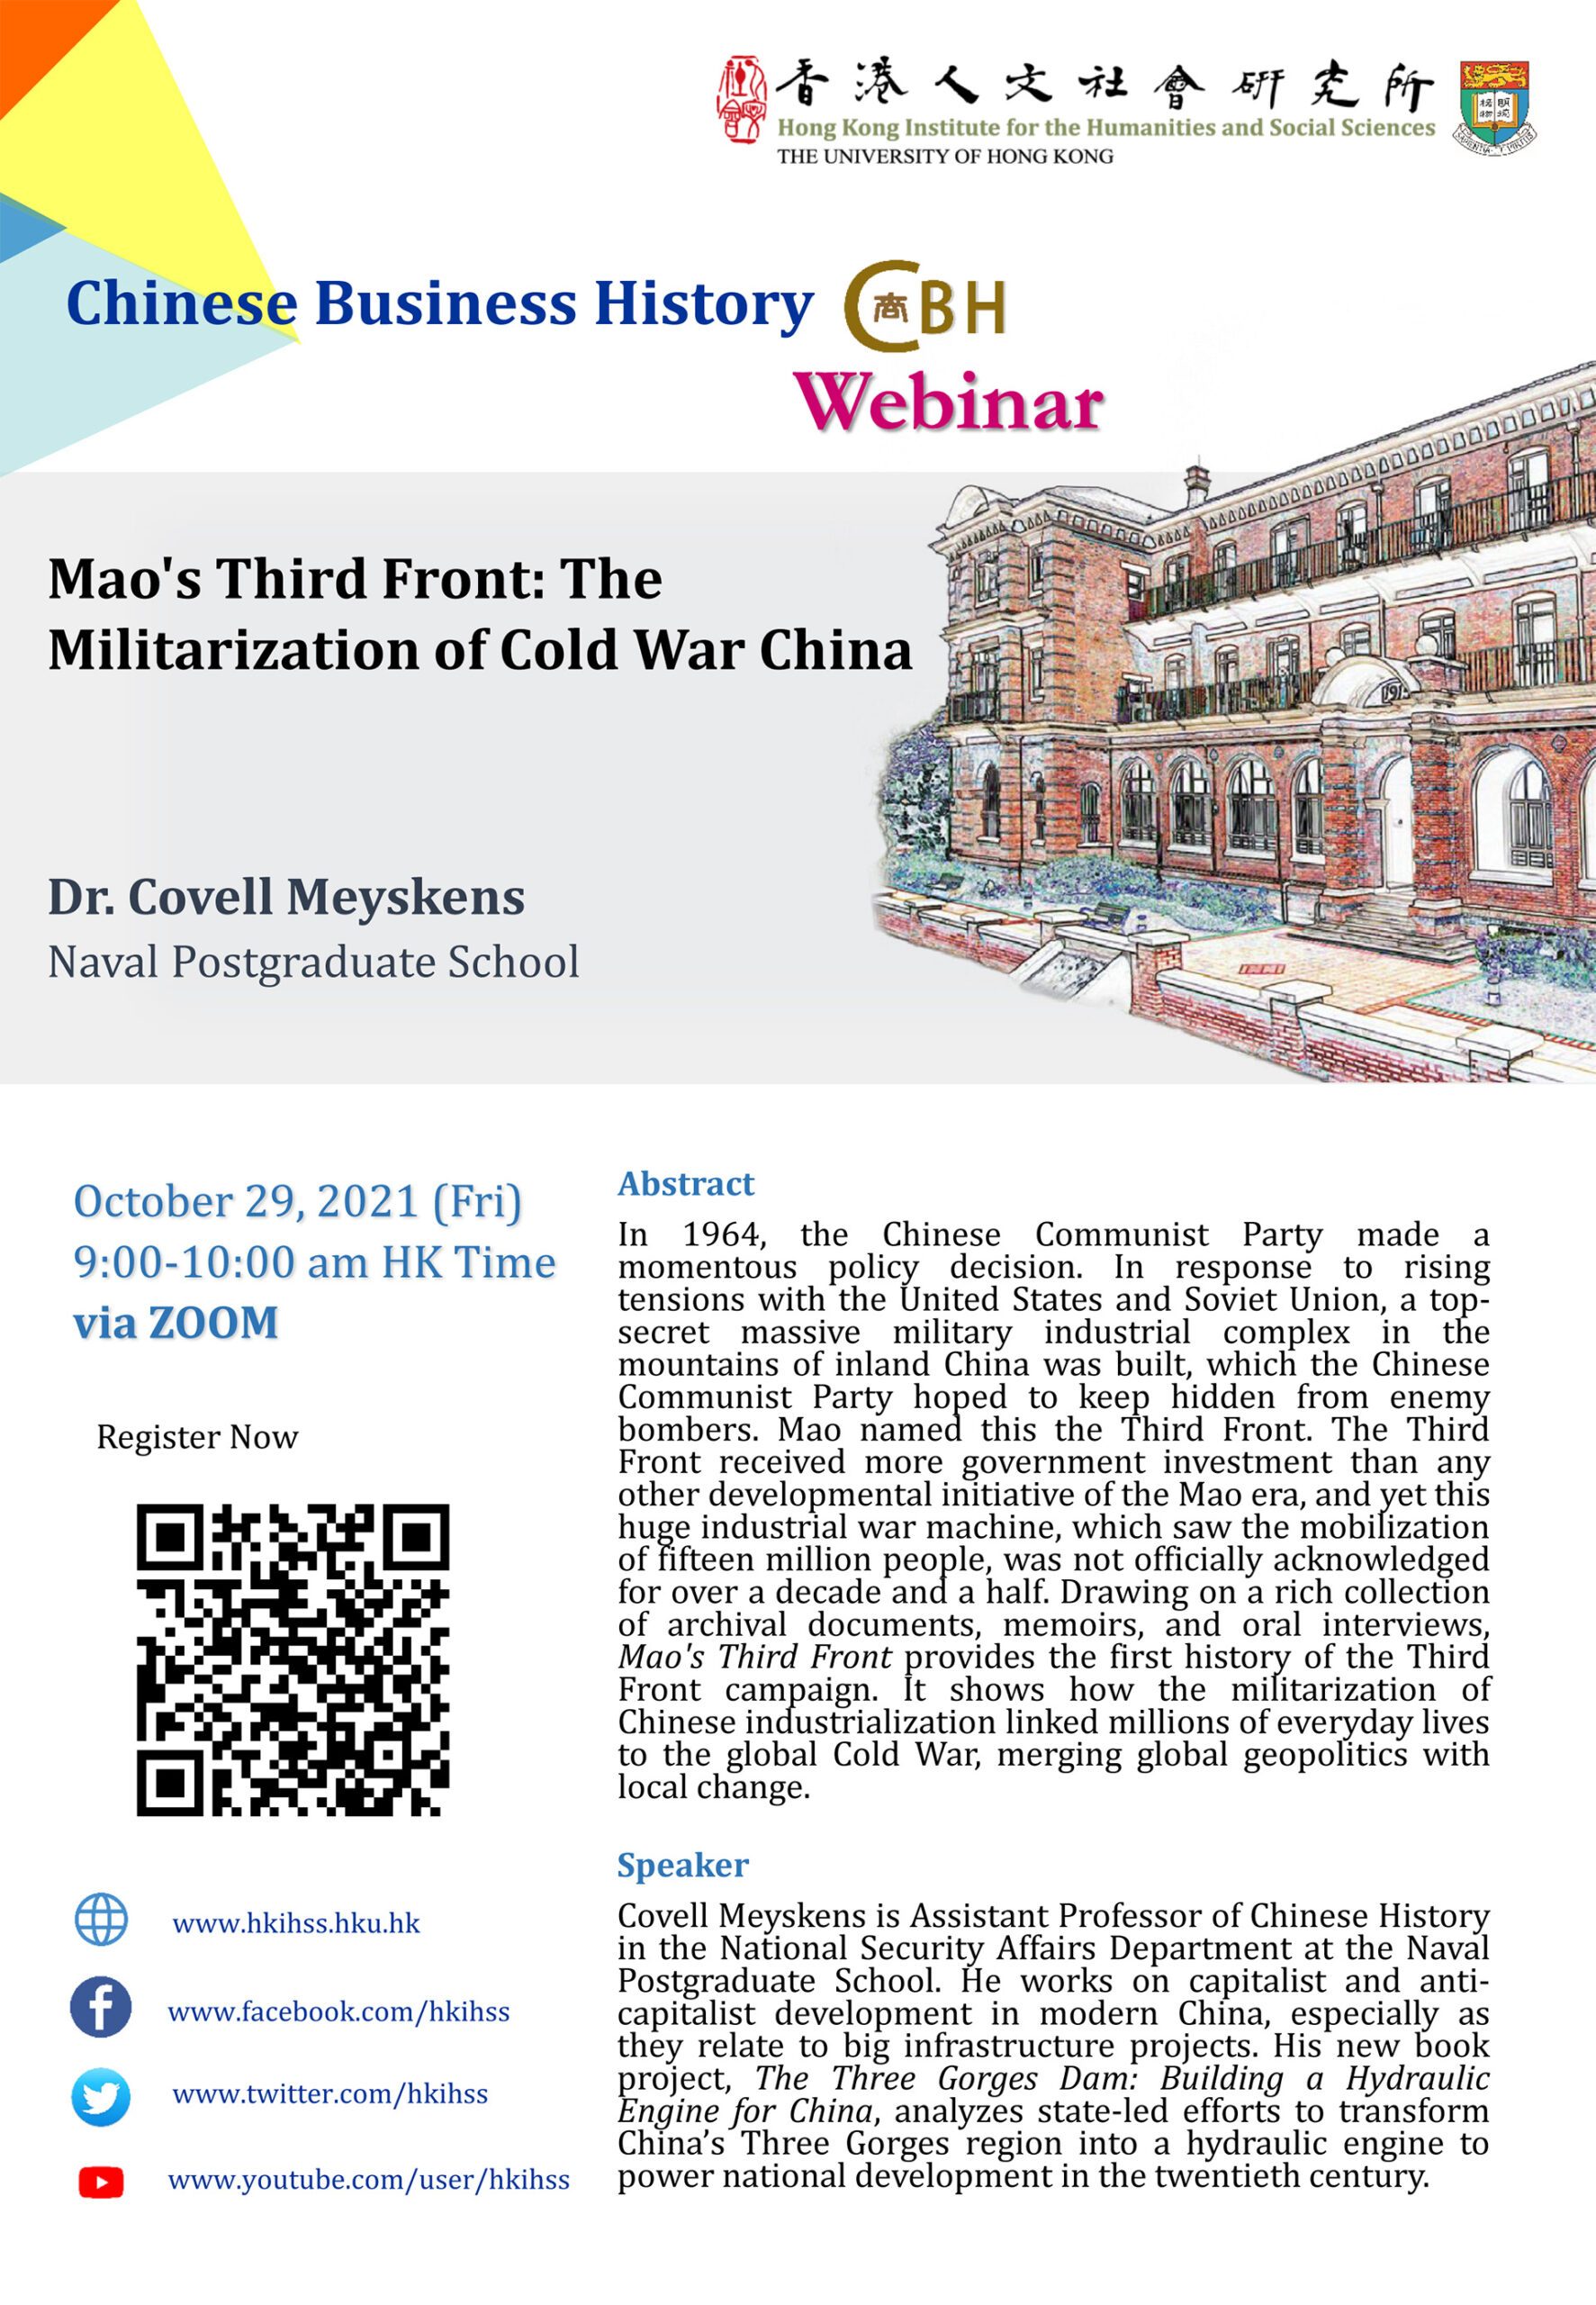 Chinese Business History Webinar on “Mao’s Third Front: The Militarization of Cold War China” by Dr. Covell Meyskens (October 29, 2021)